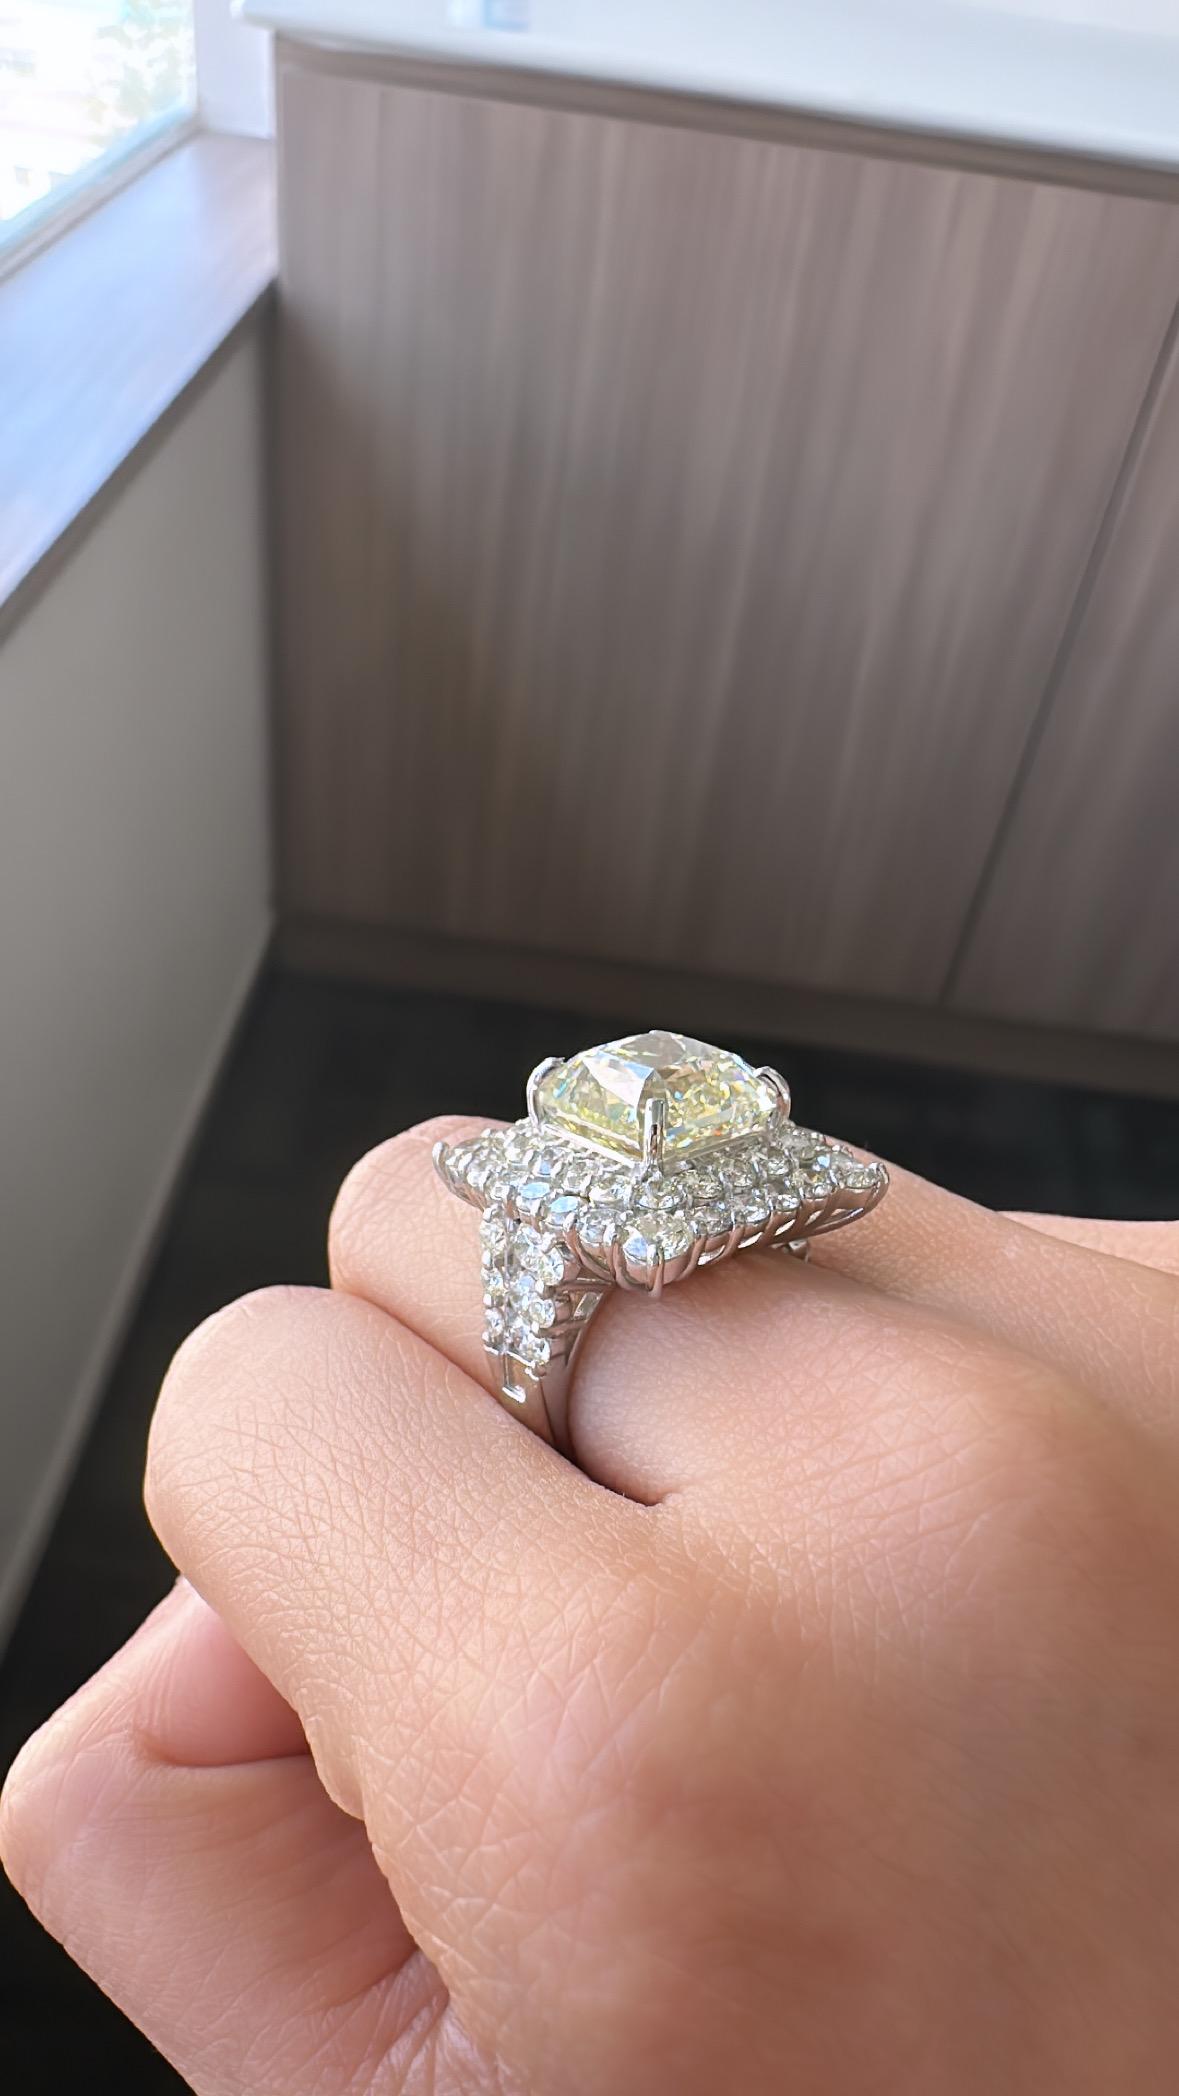 10.03 carats, Very Light Yellow, VS2 clarity, Princess Diamond Engagement Ring For Sale 6